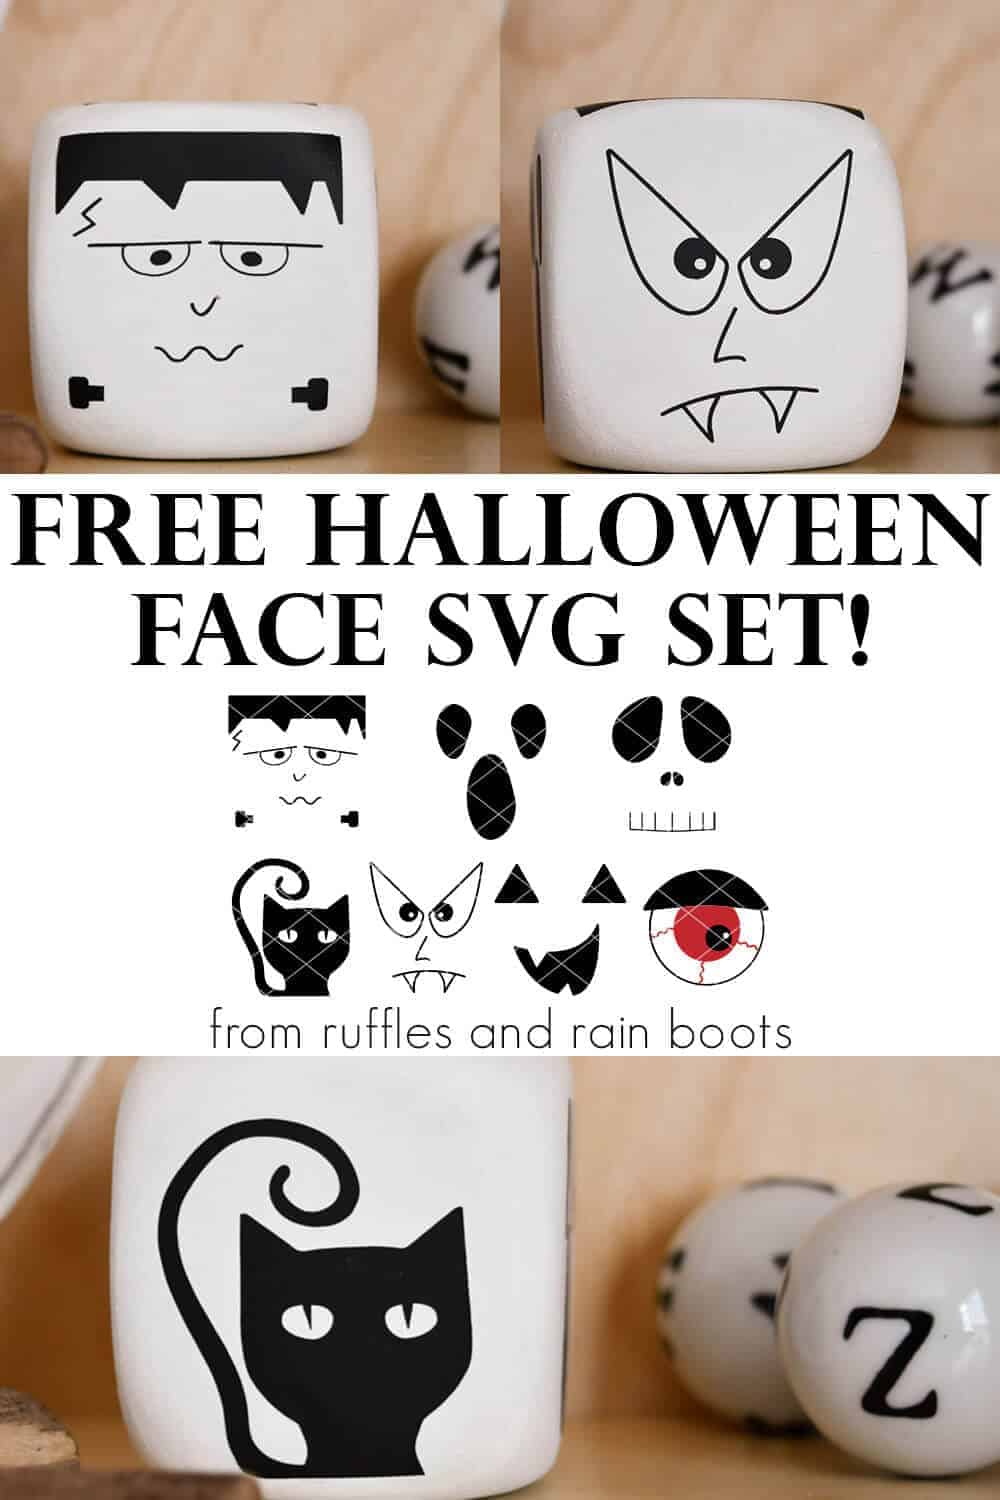 collage of Halloween faces svg offered for free from ruffles and rain boots for Halloween crafts and decor